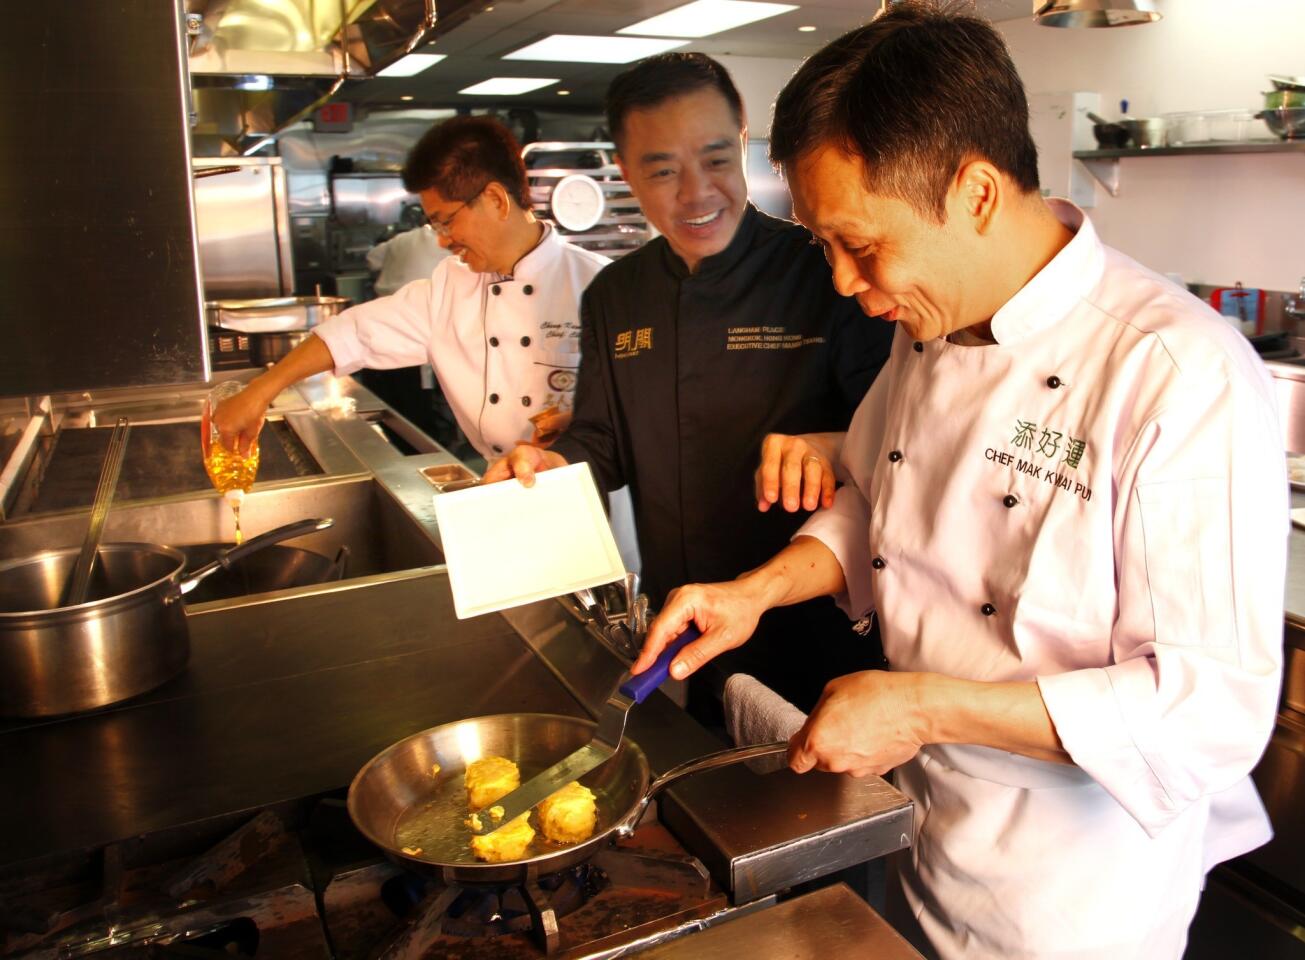 Three Michelin-rated Hong Kong Chefs, Chang Kam Fu, left, Tsang Chiu Lit and Mak Kwai Pui demonstrate their cooking techniques while they make their dishes at Lukshon in Culver City.